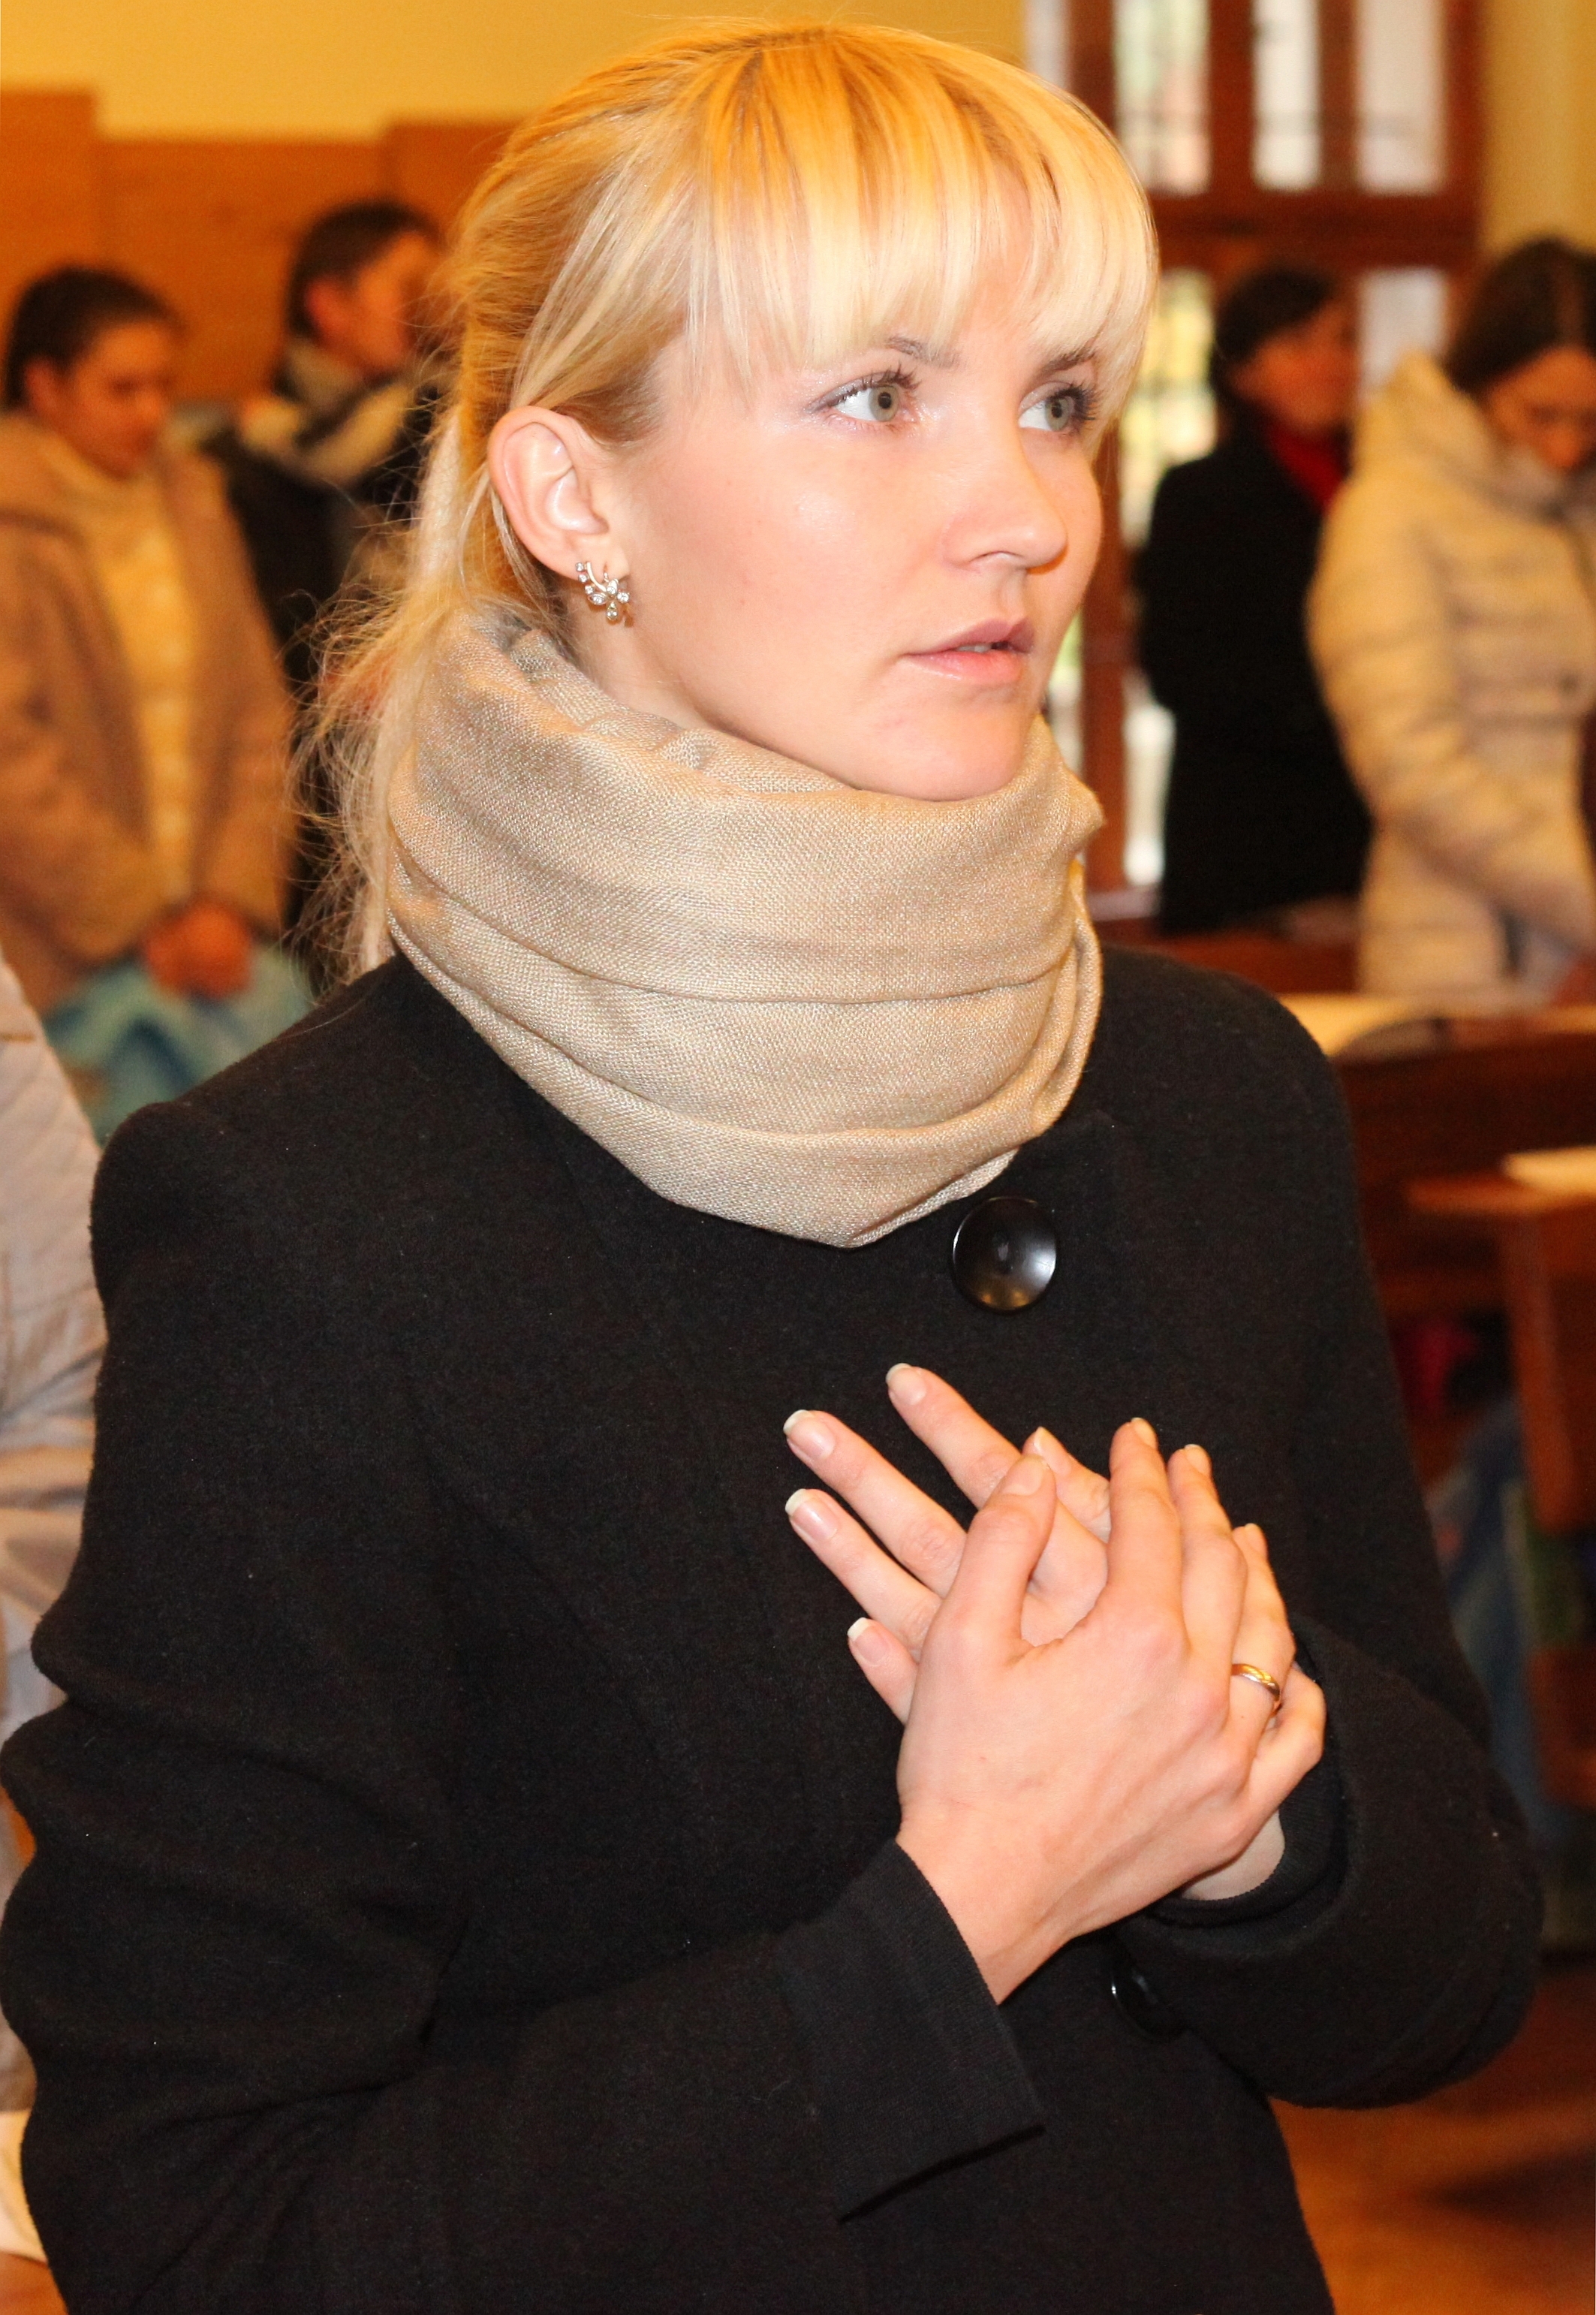 an amazingly tender and charming beautiful young blond Catholic woman in a Church, photo 2